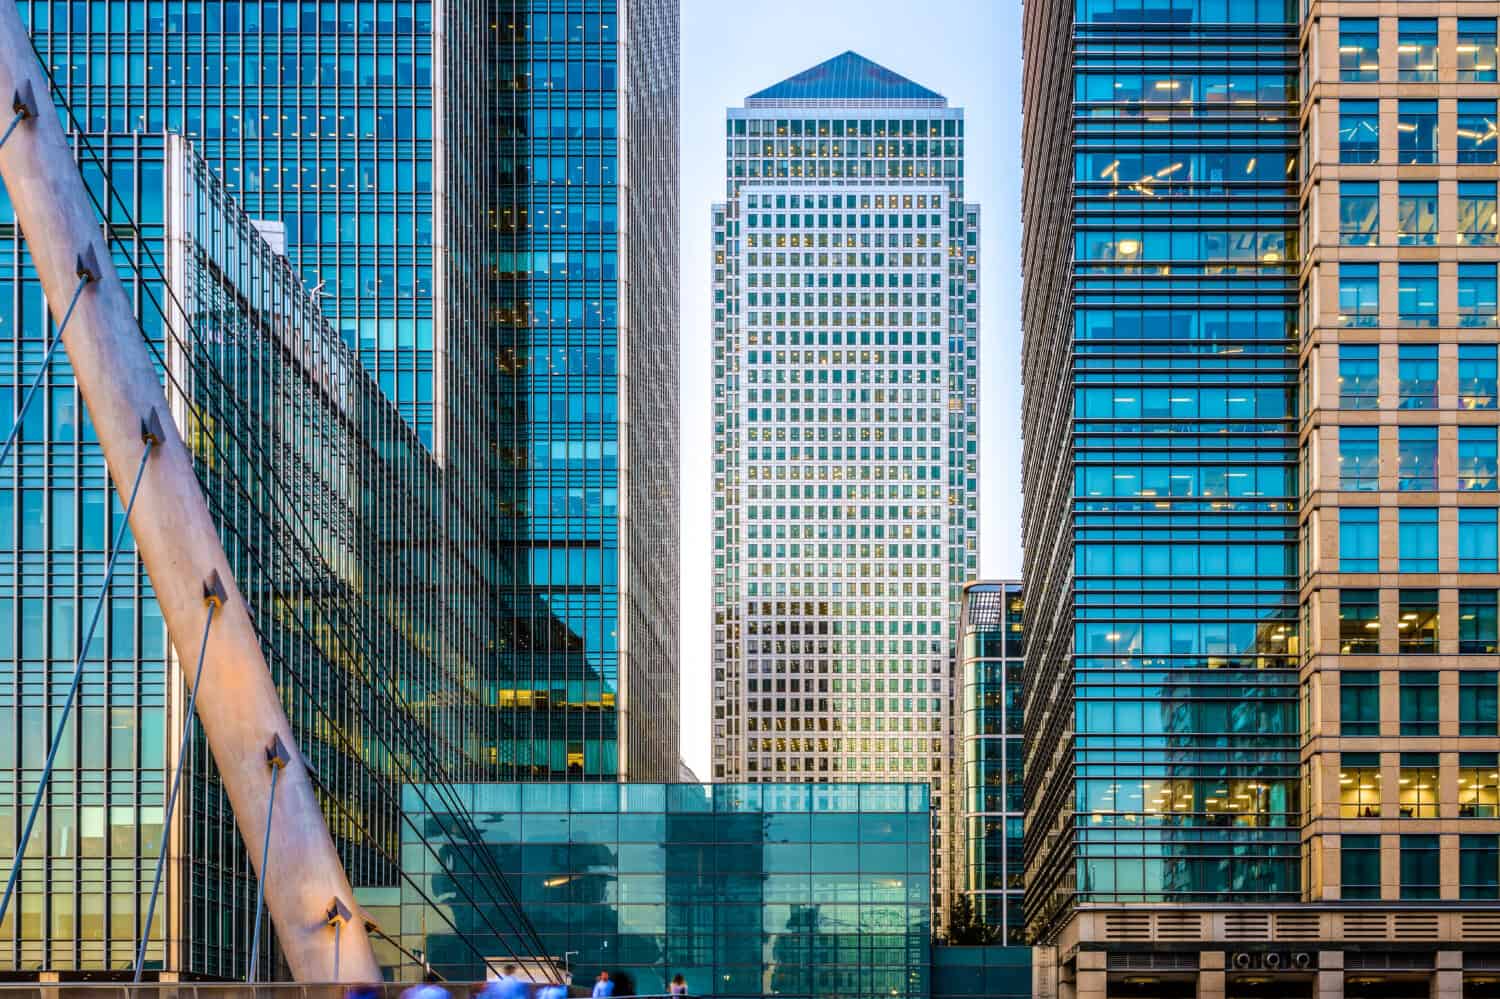 One Canada Square seen from South Quay Footbridge in Canary Wharf, London